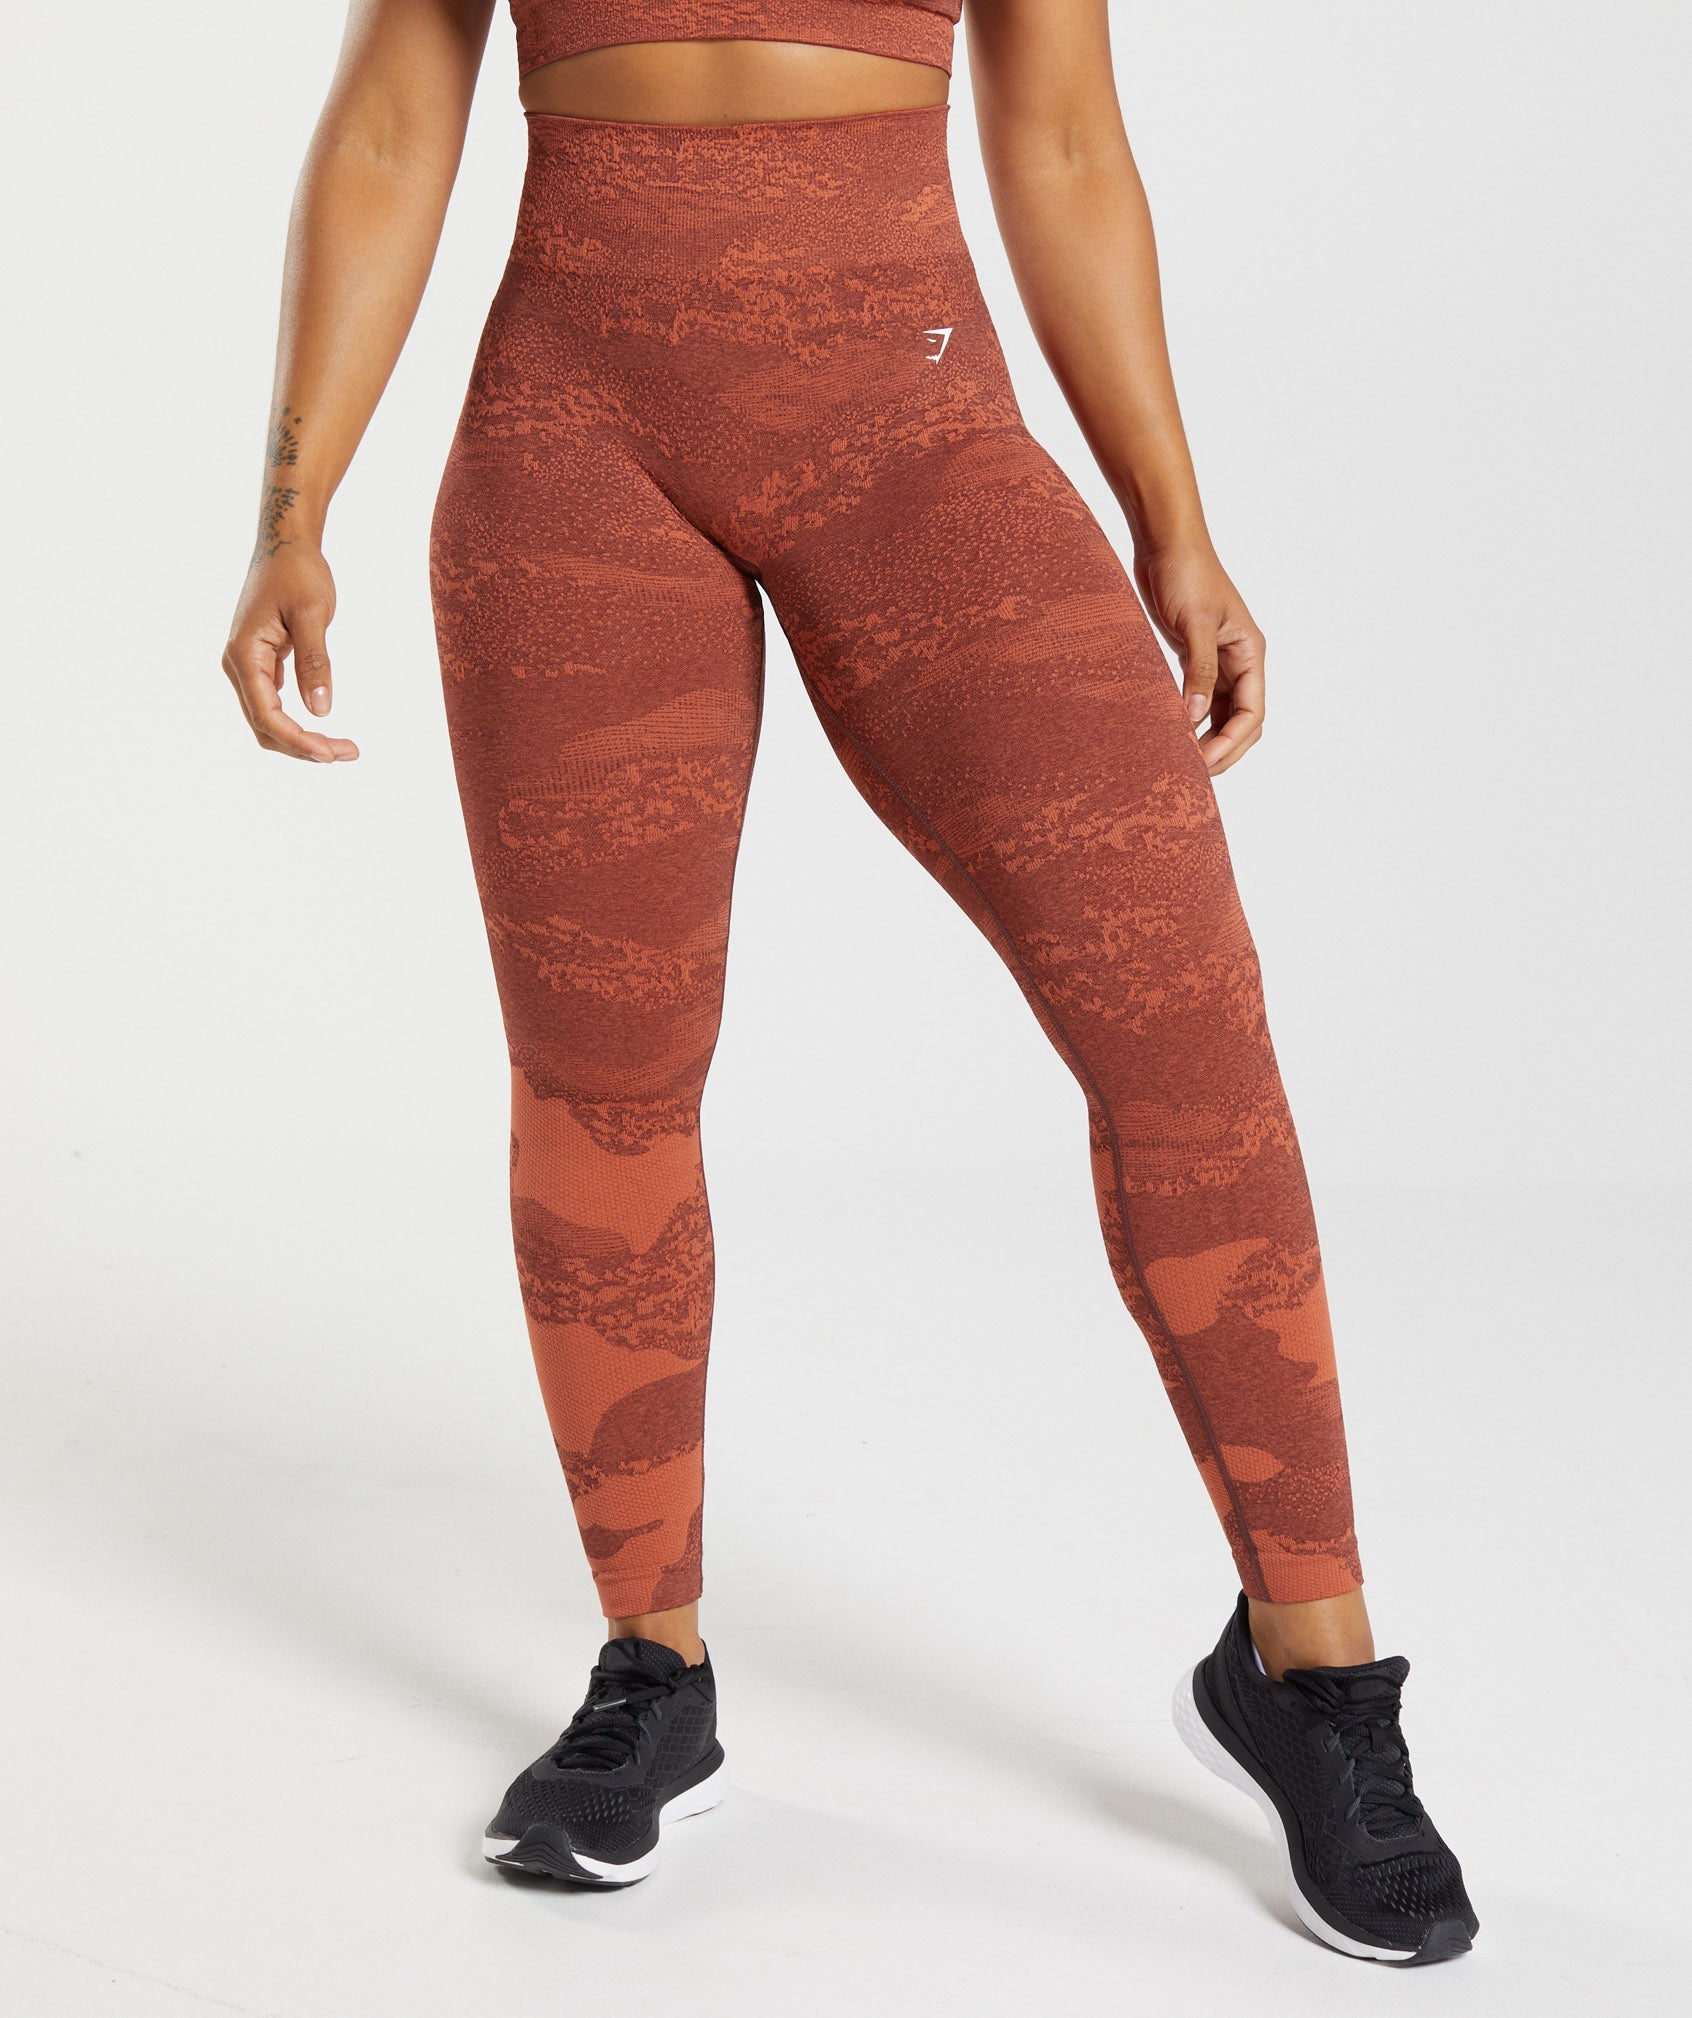 Coral Red Perforated Leggings - Gymshark Energy + Seamless